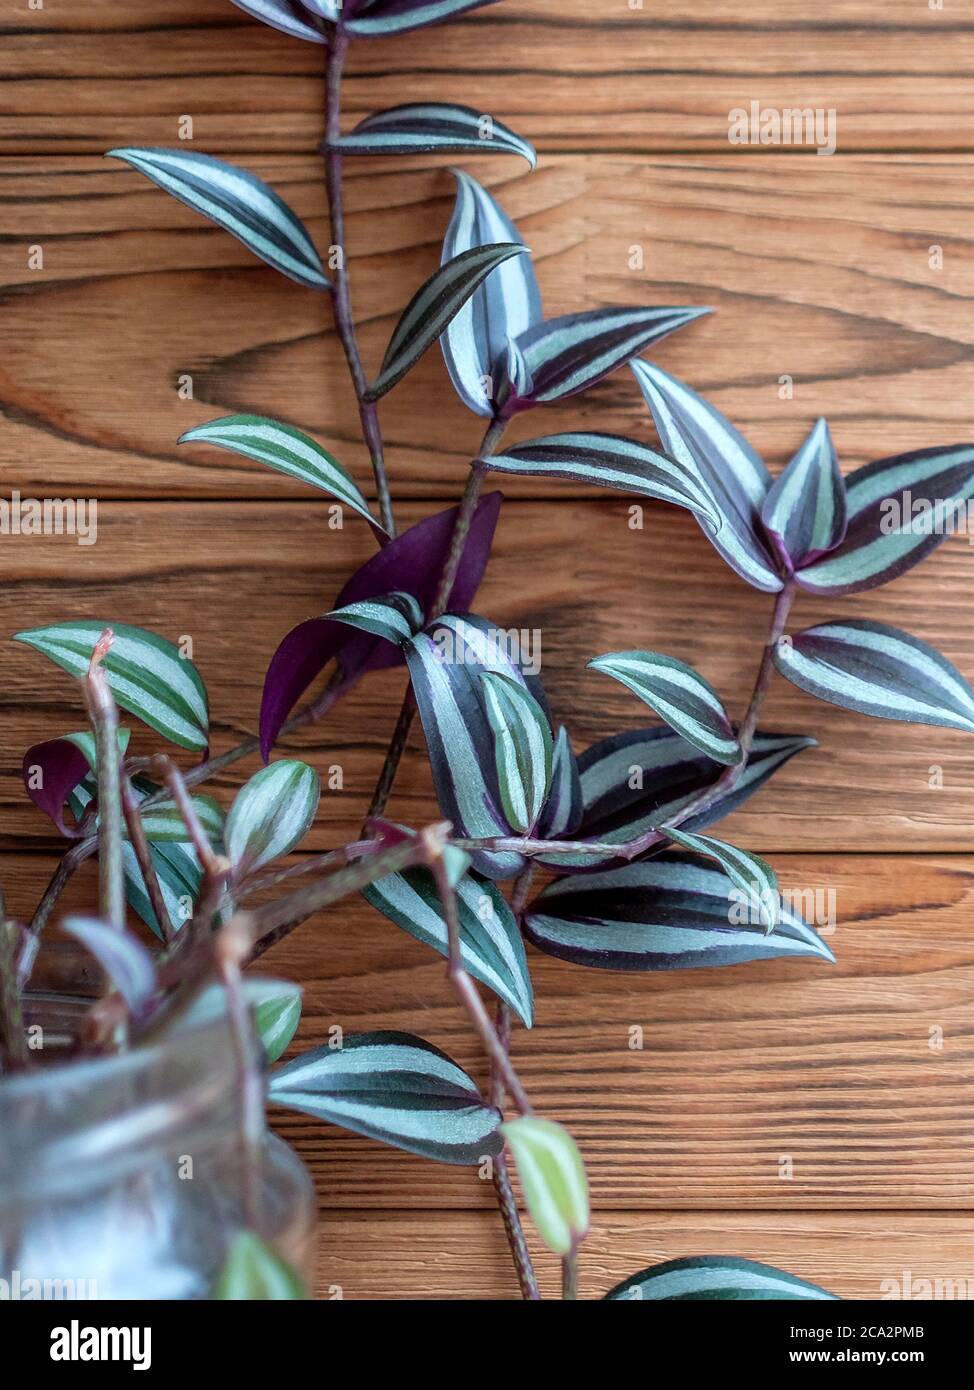 Tradescantia zebrina grows in a glass jar. Square image. Purple and green leaves of plant. Stock Photo